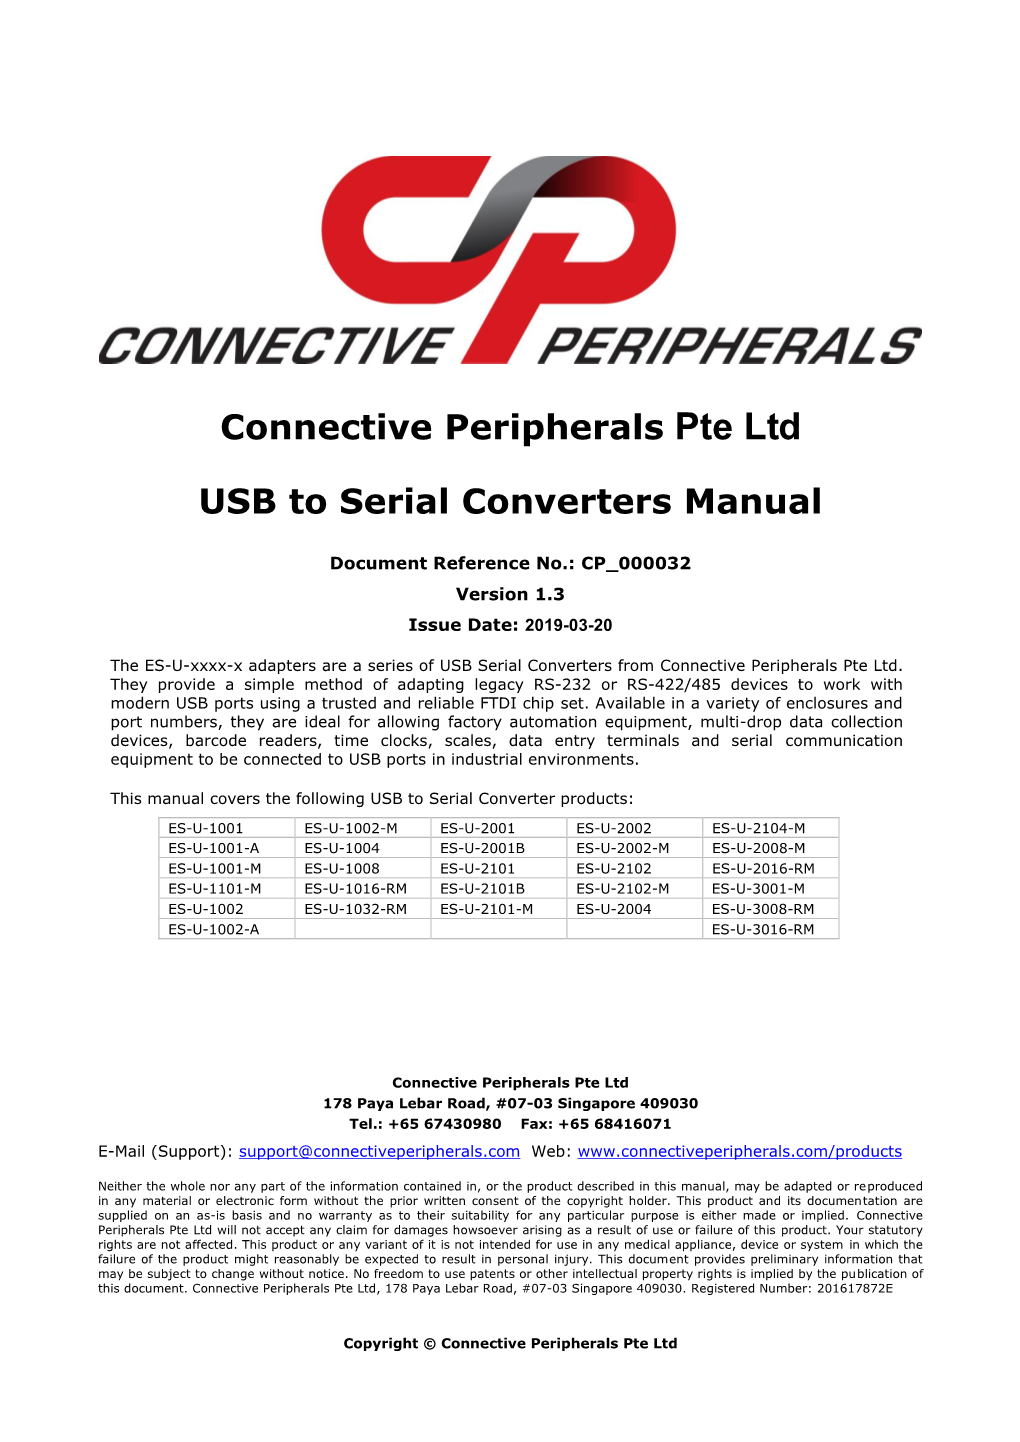 Connective Peripherals Pte Ltd USB to Serial Converters Manual